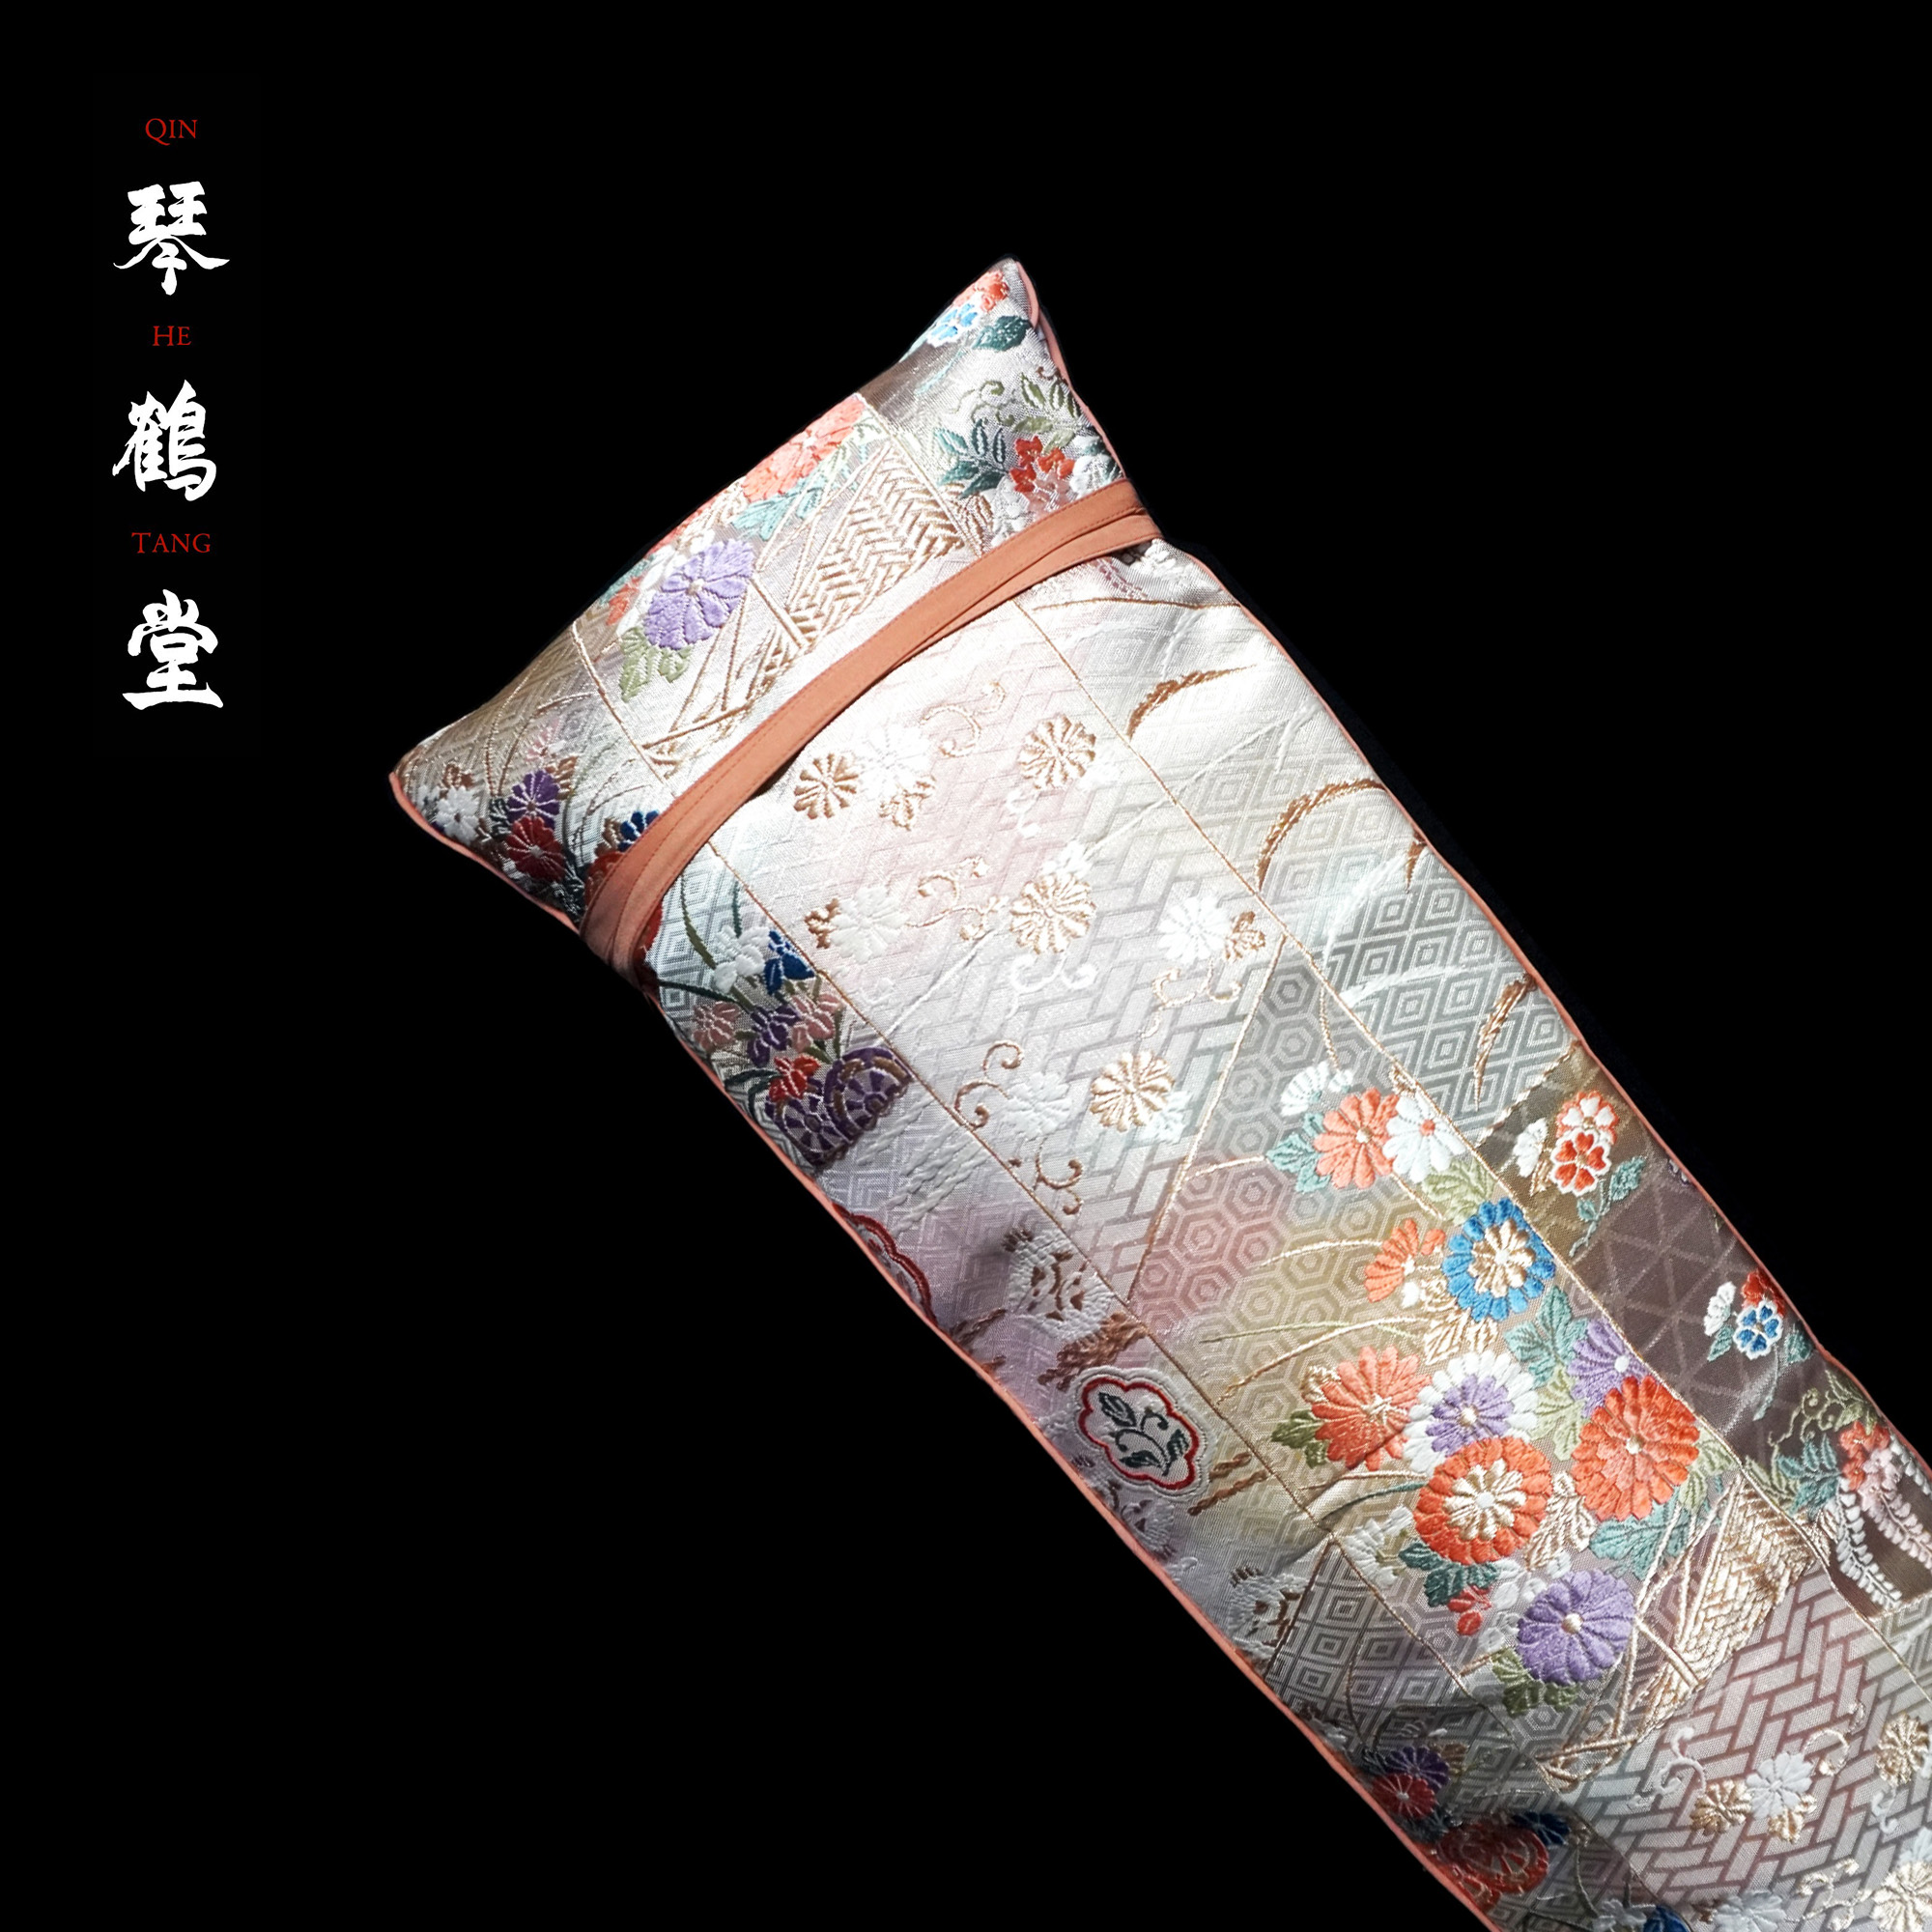 GoldenHarmony" - Premium Silk Qin Bag with Antique Brocade Fabric,  Exquisite Handcrafted Chinese Qin Cover